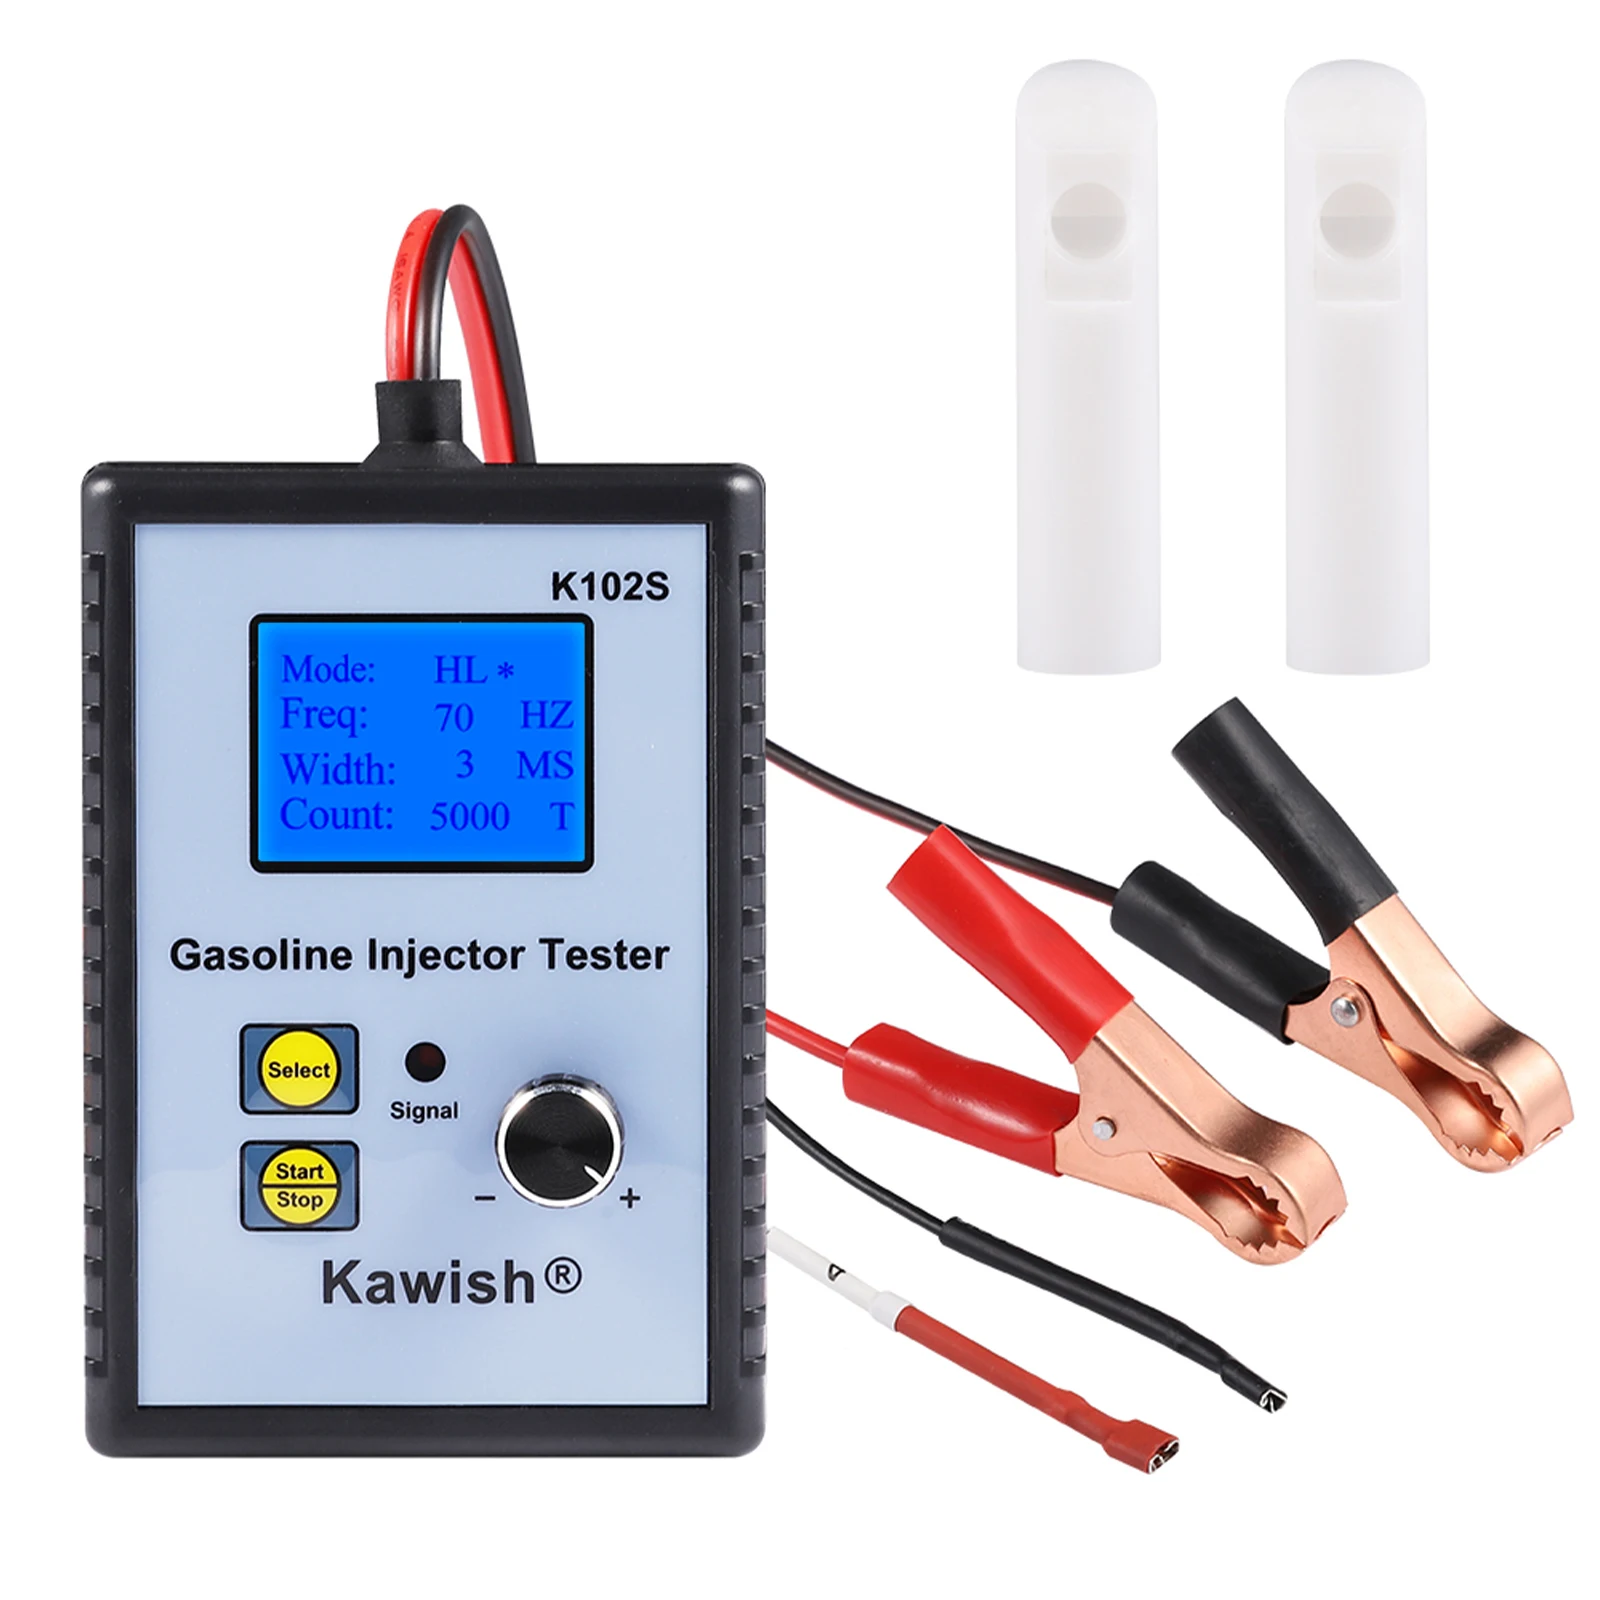 Gasoline Injector Tester Fuel Injector Tester Powerful Fuel System Scan Tool 